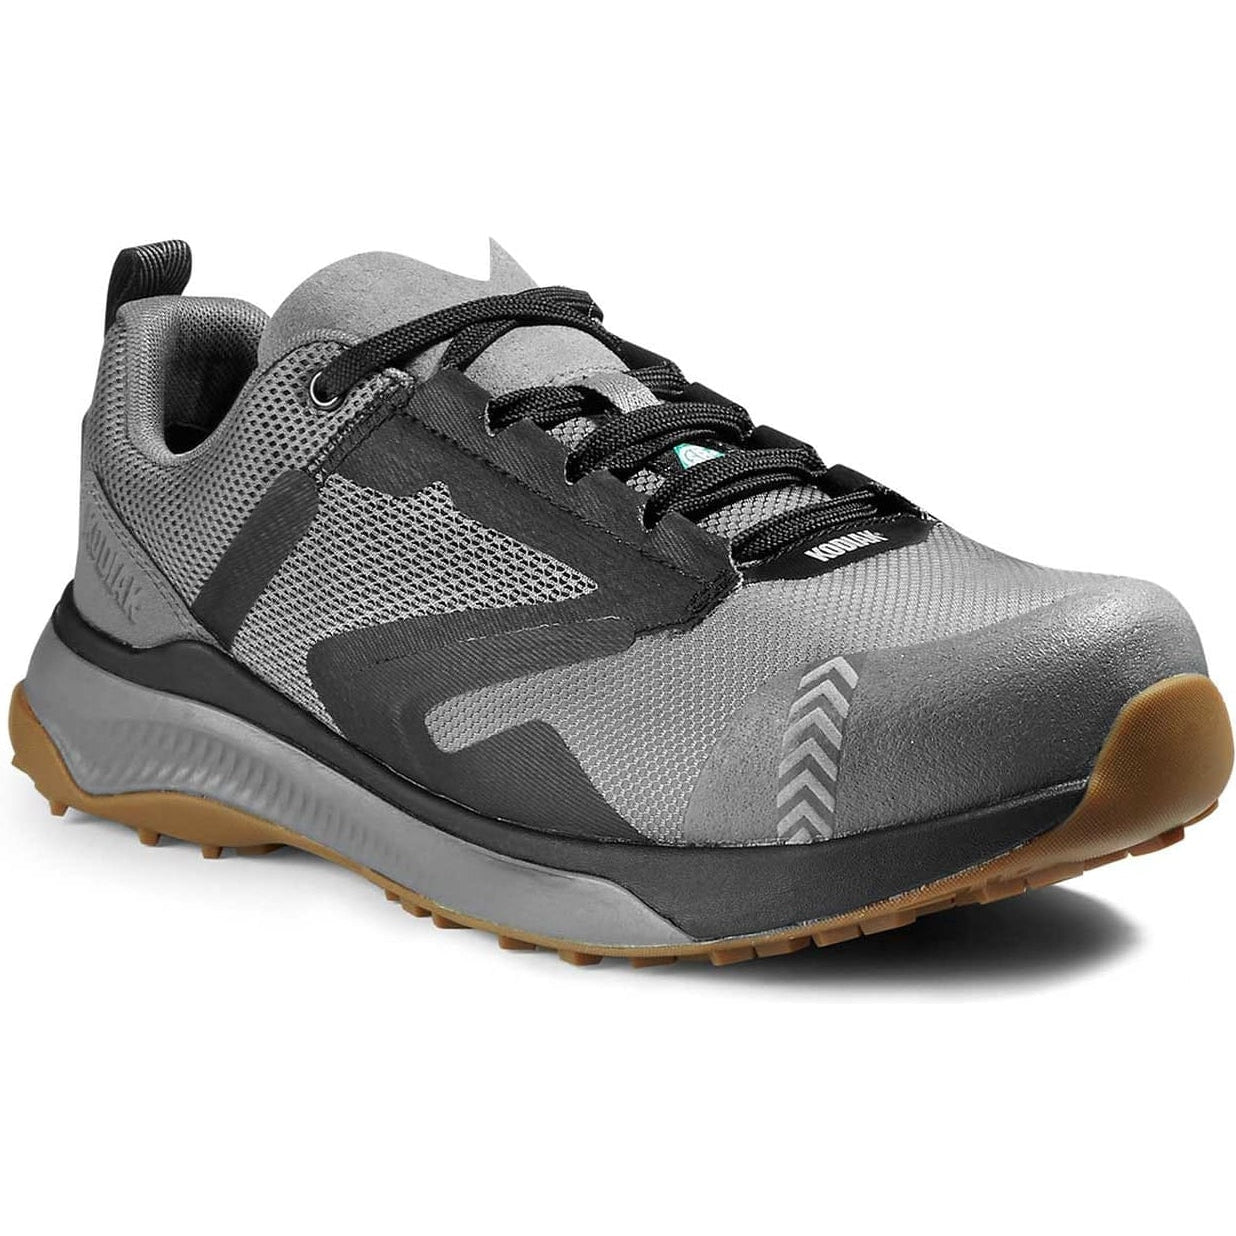 Kodiak Men's Quicktrail Low CT Athletic Safety Work Shoe -Gray- 4TGYGY 7 / Wide / Gray - Overlook Boots